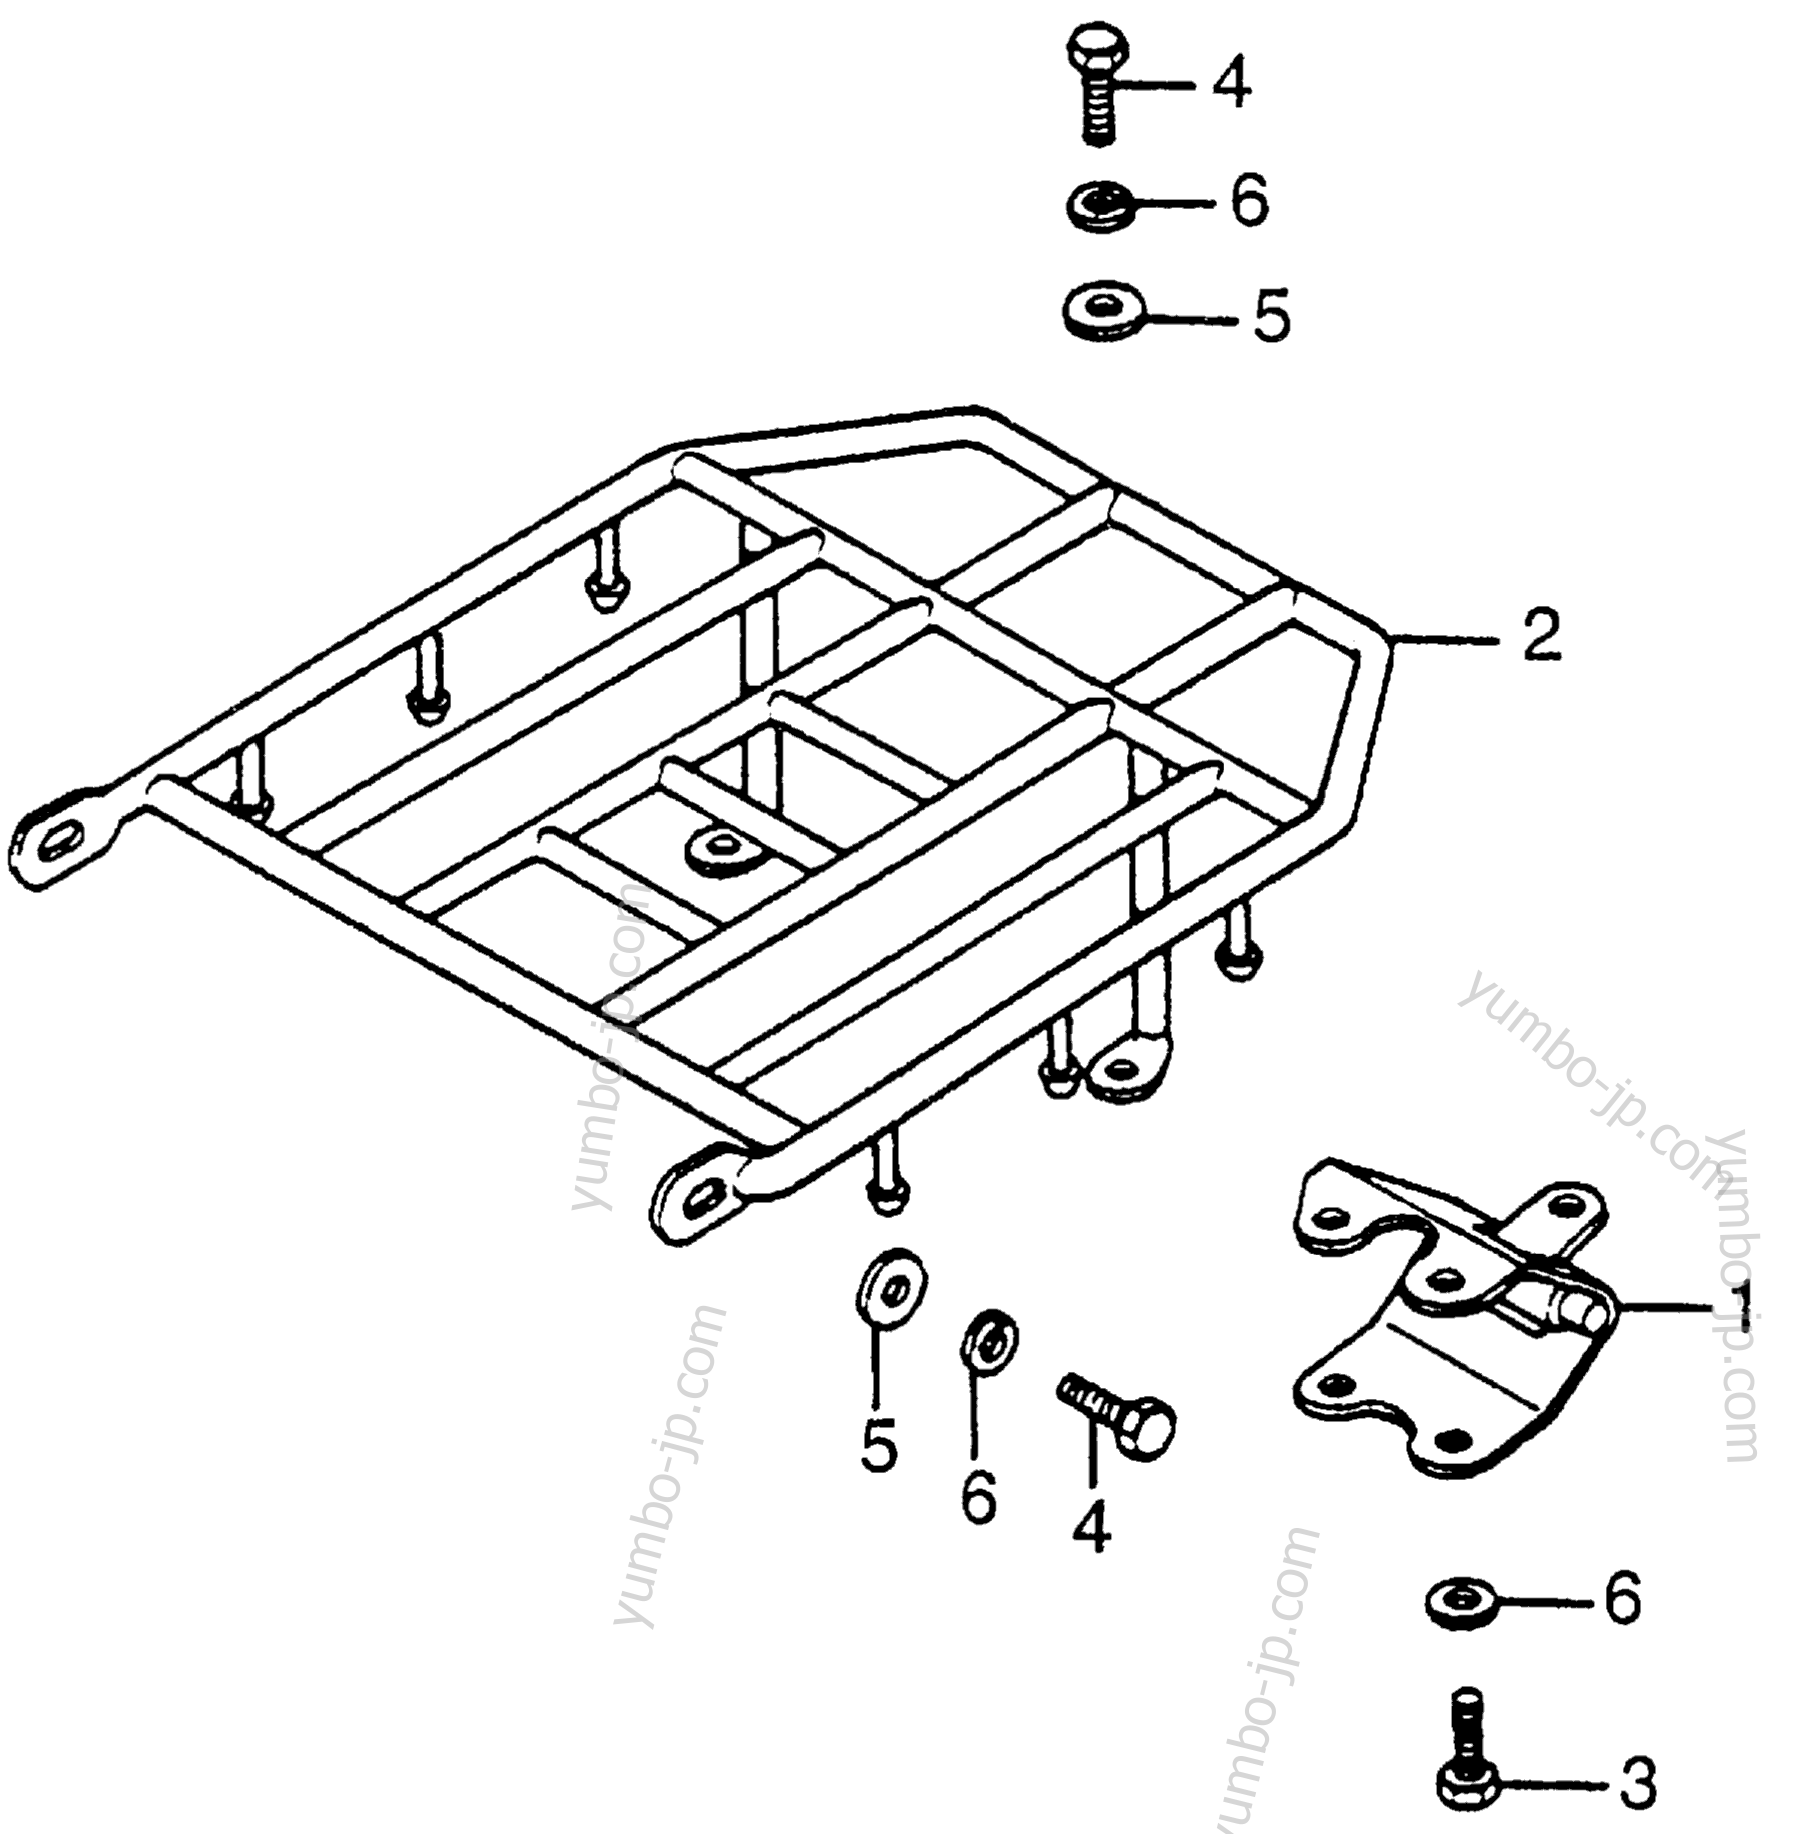 TRAILER HITCH / LUGGAGE CARRIER for UTVs HONDA FL250 A 1981 year